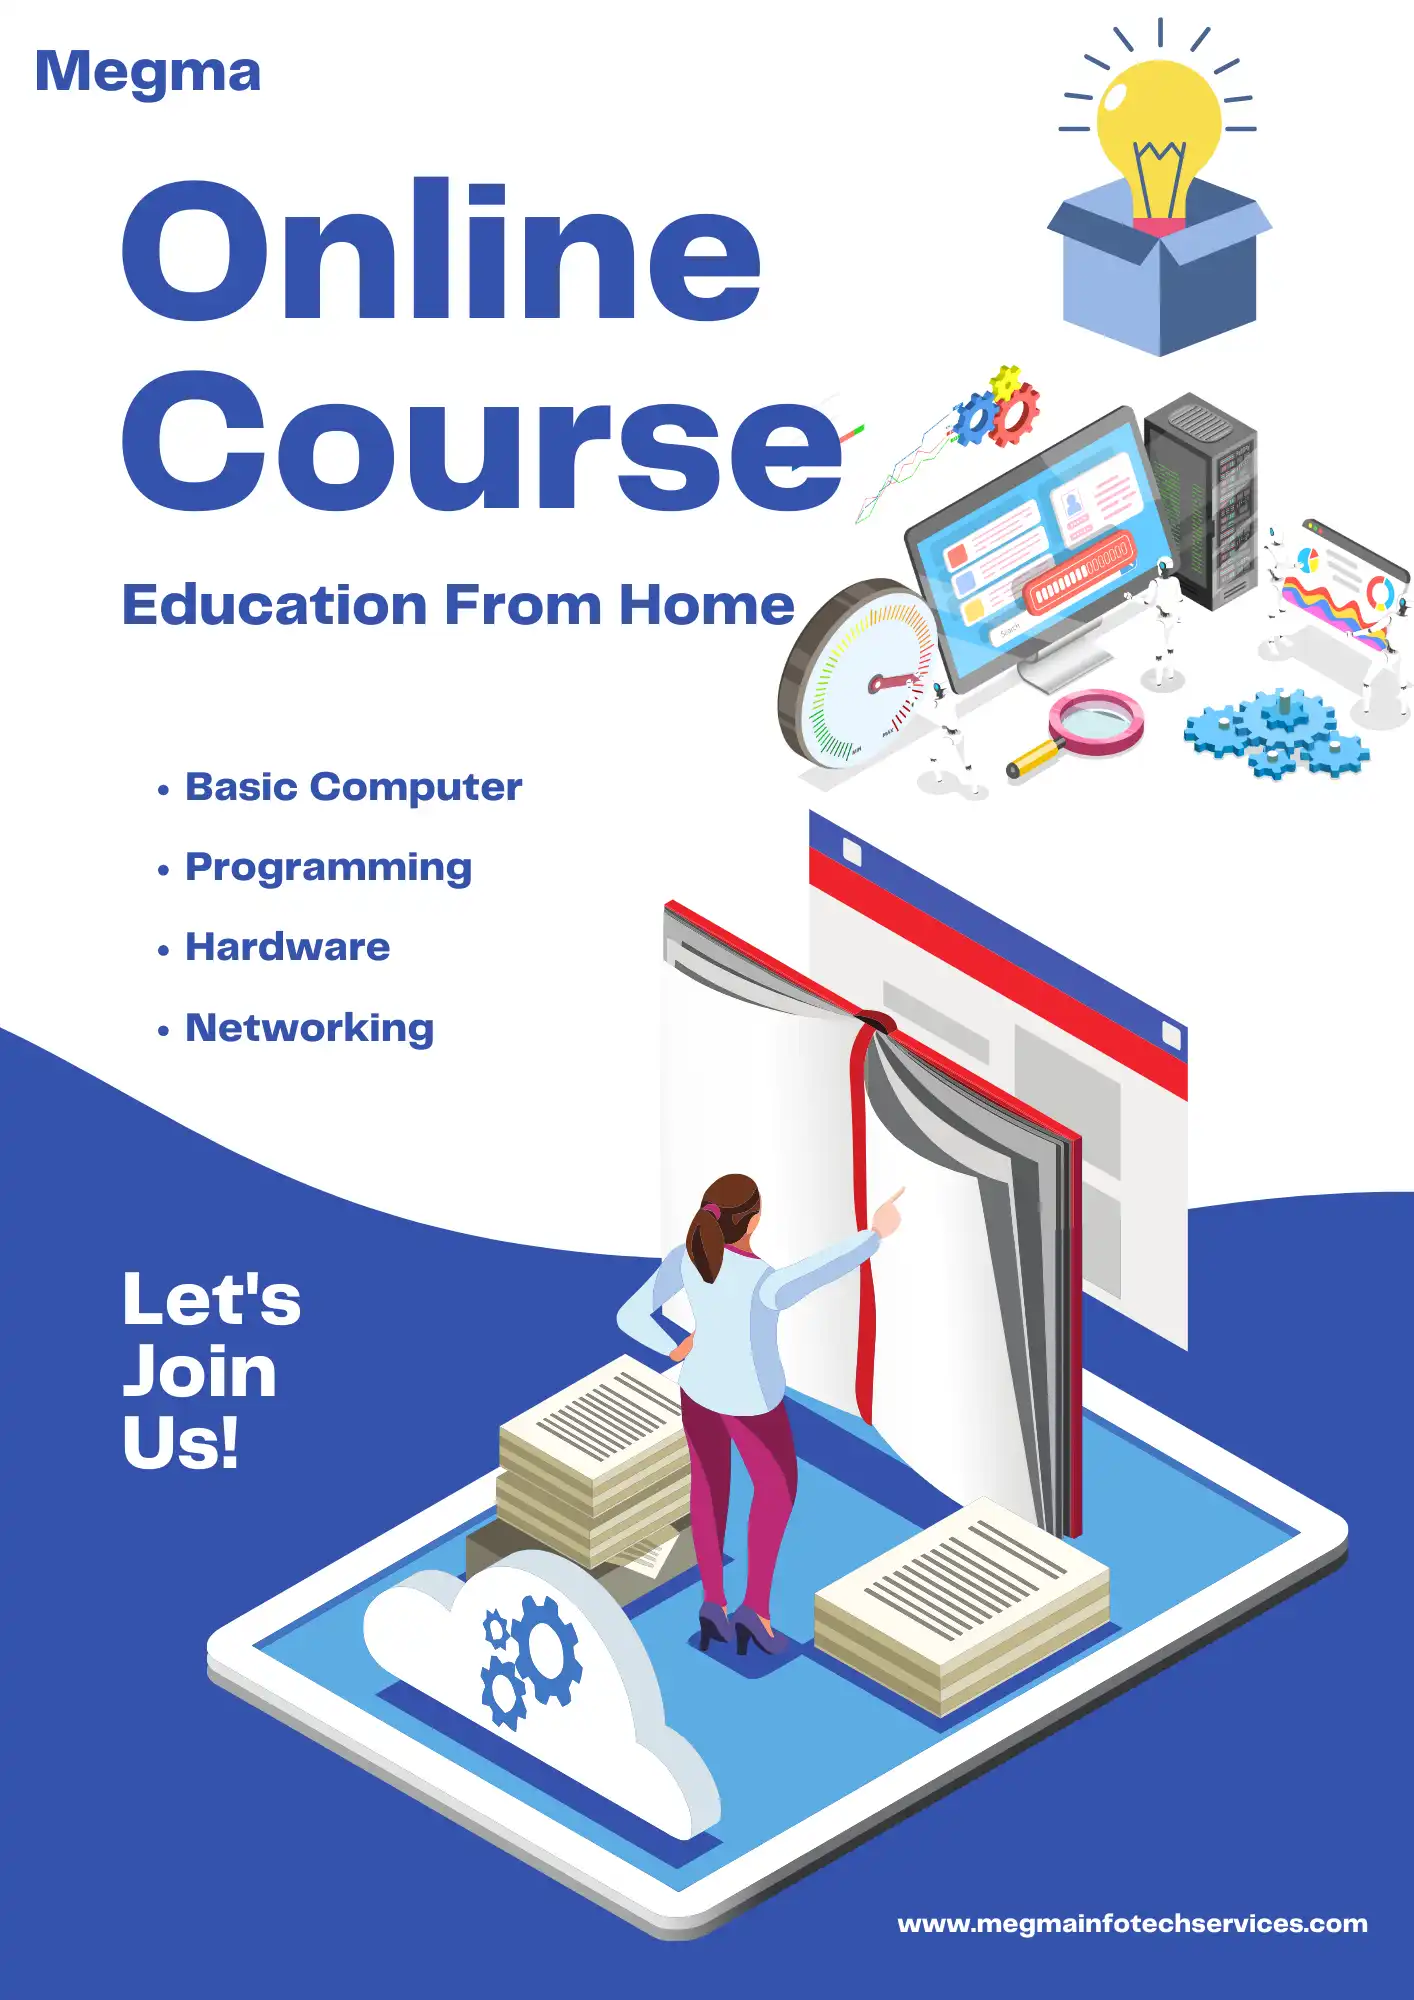 Online Computer courses like basic computer, Programming languages